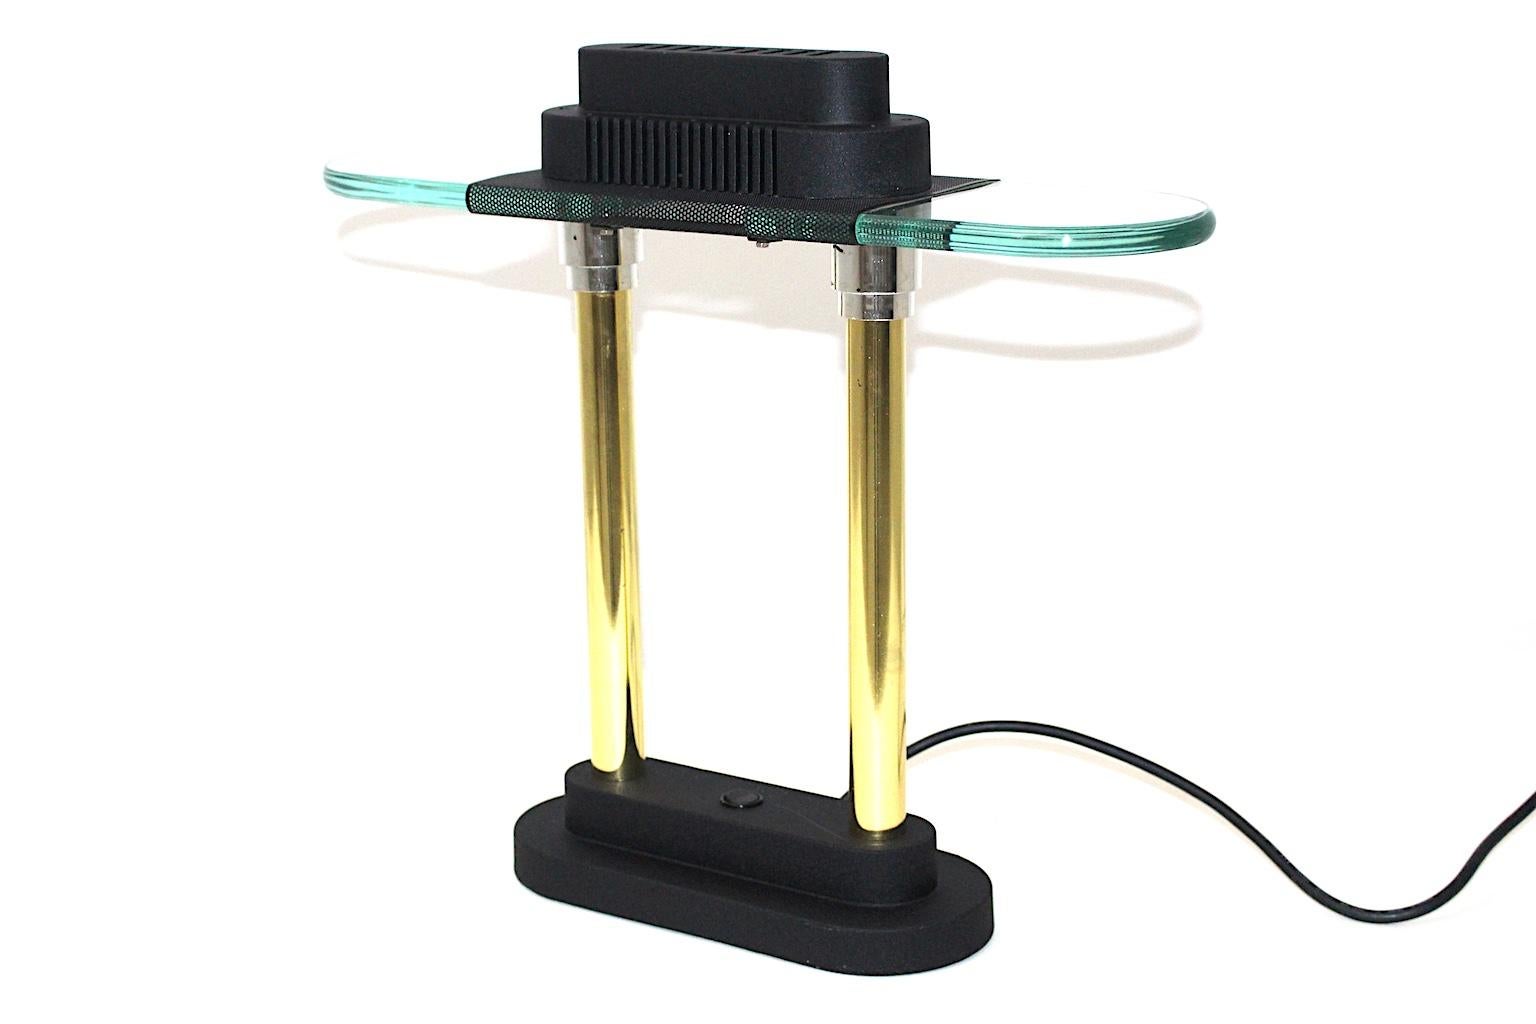 The modern Memphis style metal and glass vintage table lamp was designed by Robert Sonneman 1987 and produced by George Kovacs, USA.
Furthermore the Memphis style table lamp was made of brass, chrome, black lacquered metal and glass. Also the table